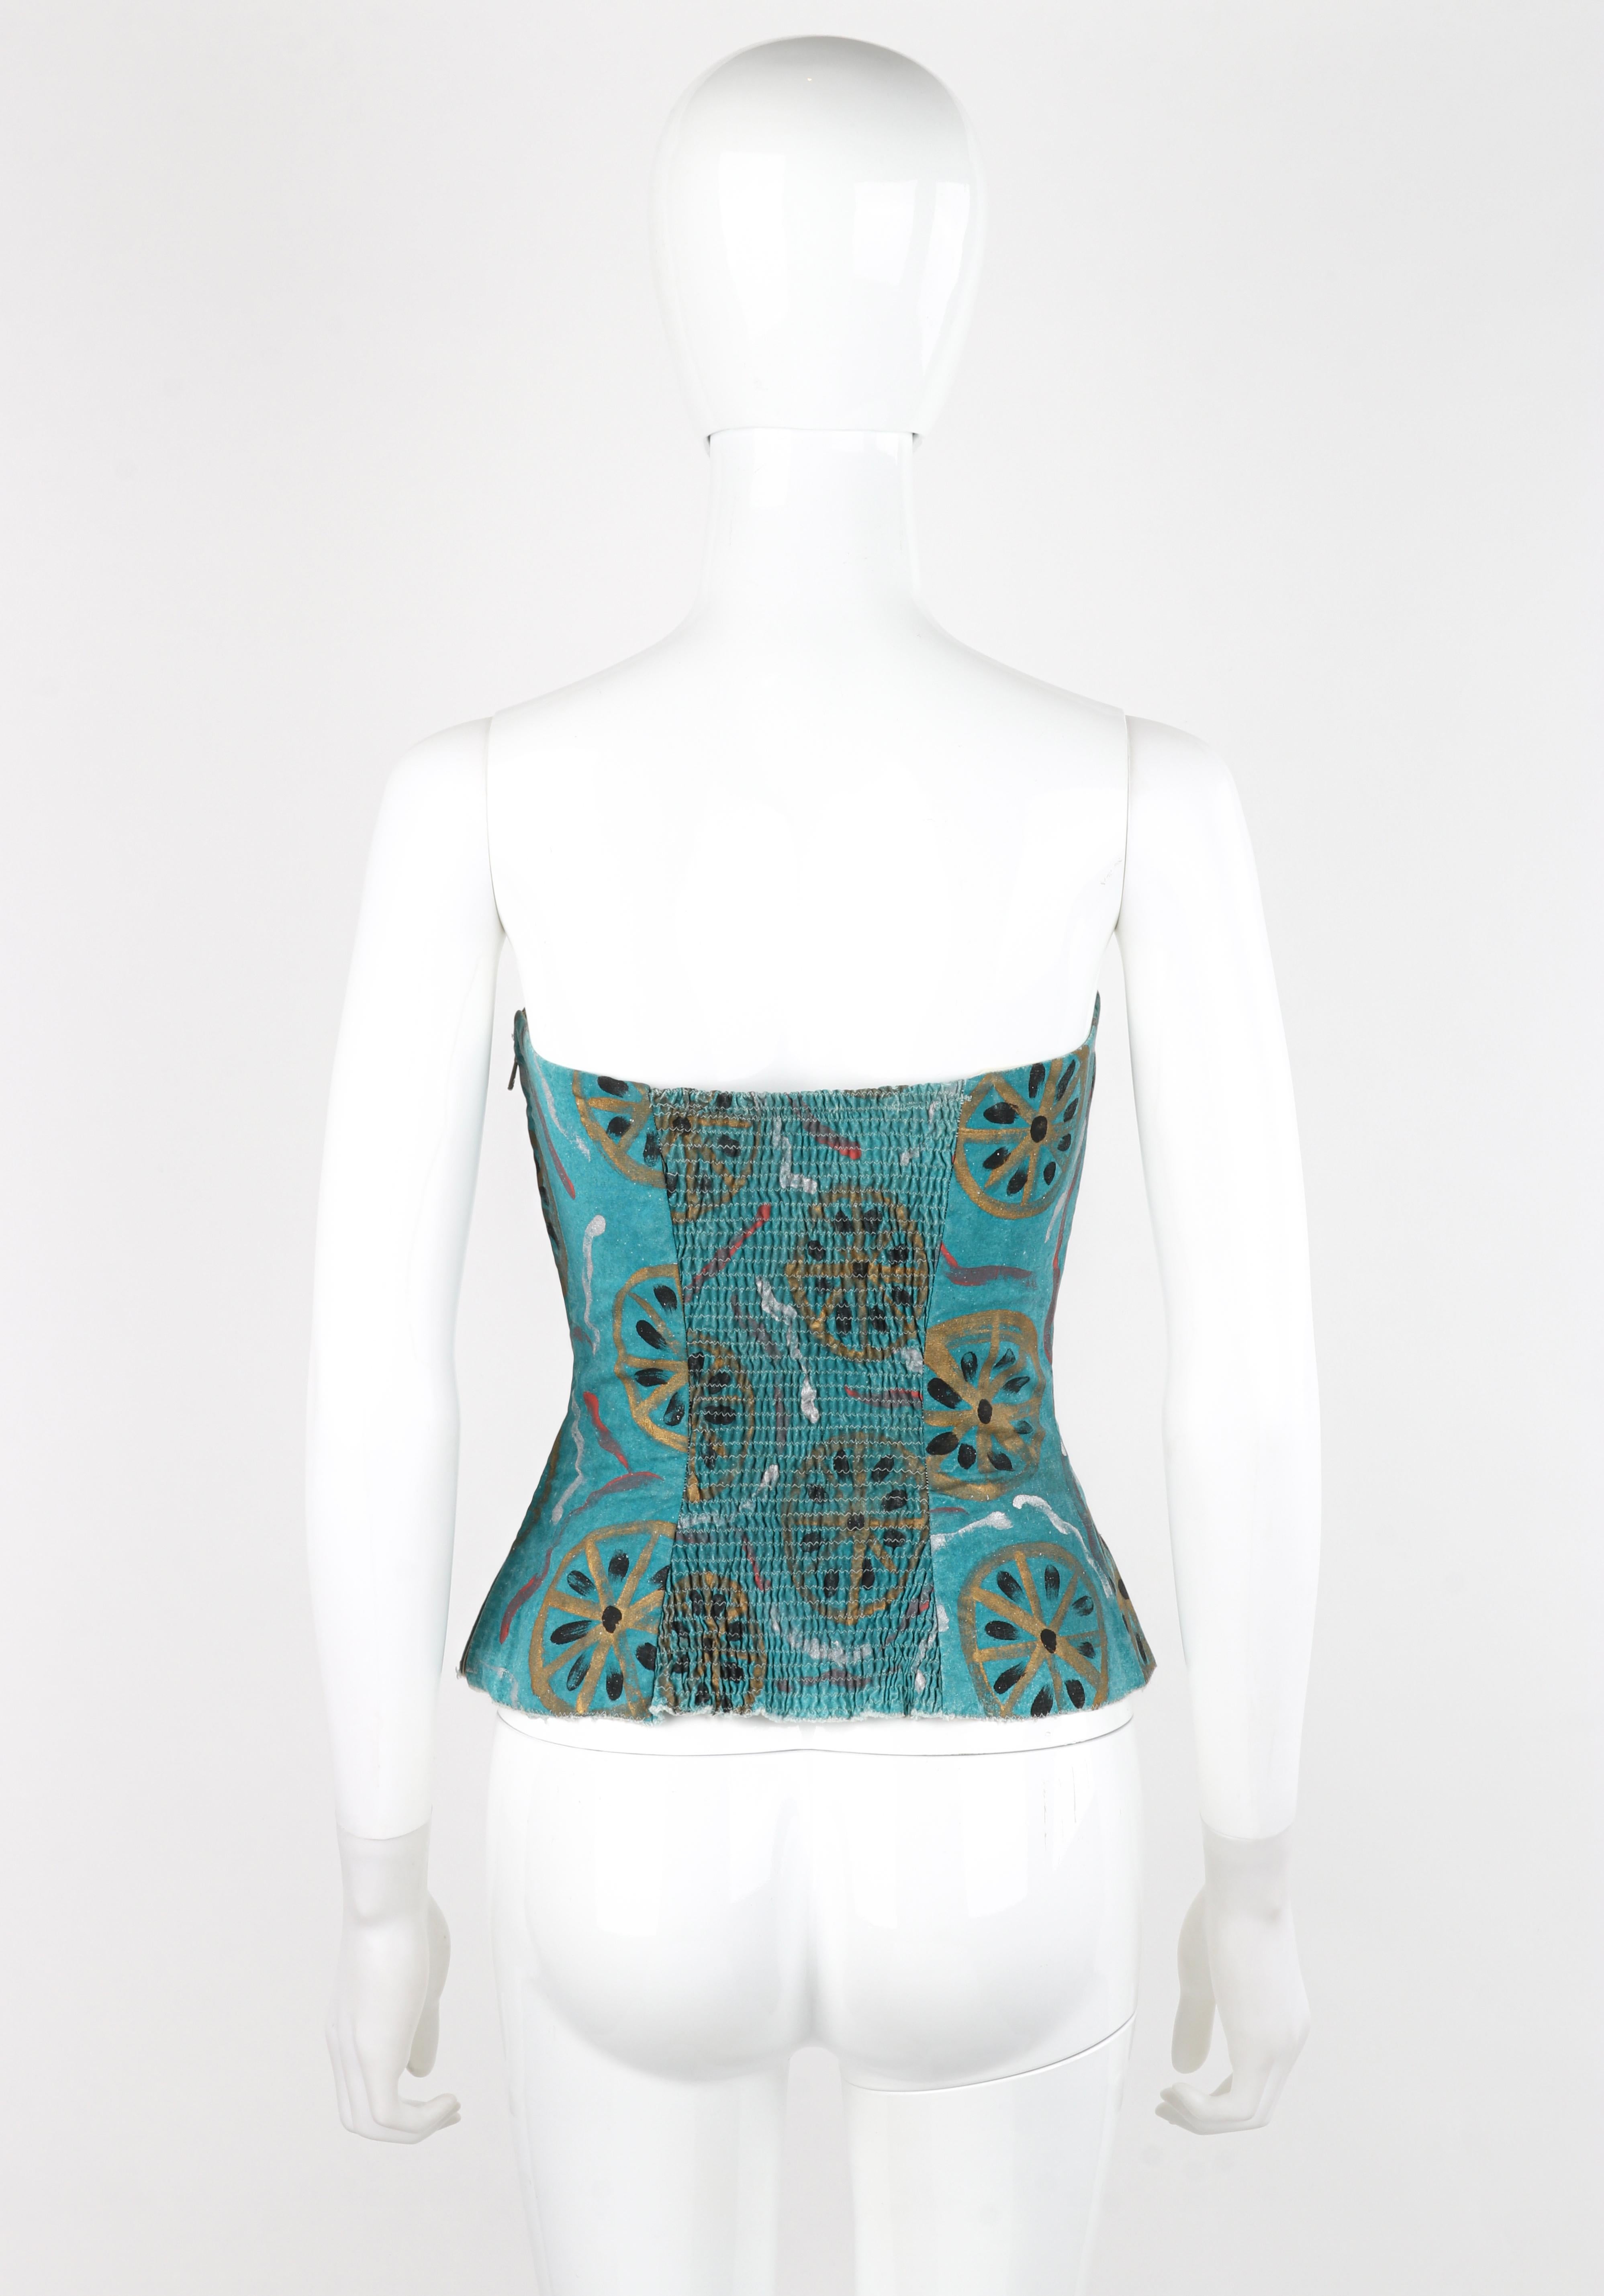 EMILIO PUCCI c.1954 Vtg Teal Cotton Fitted Hand Painted Bustier Sun Top RARE For Sale 4